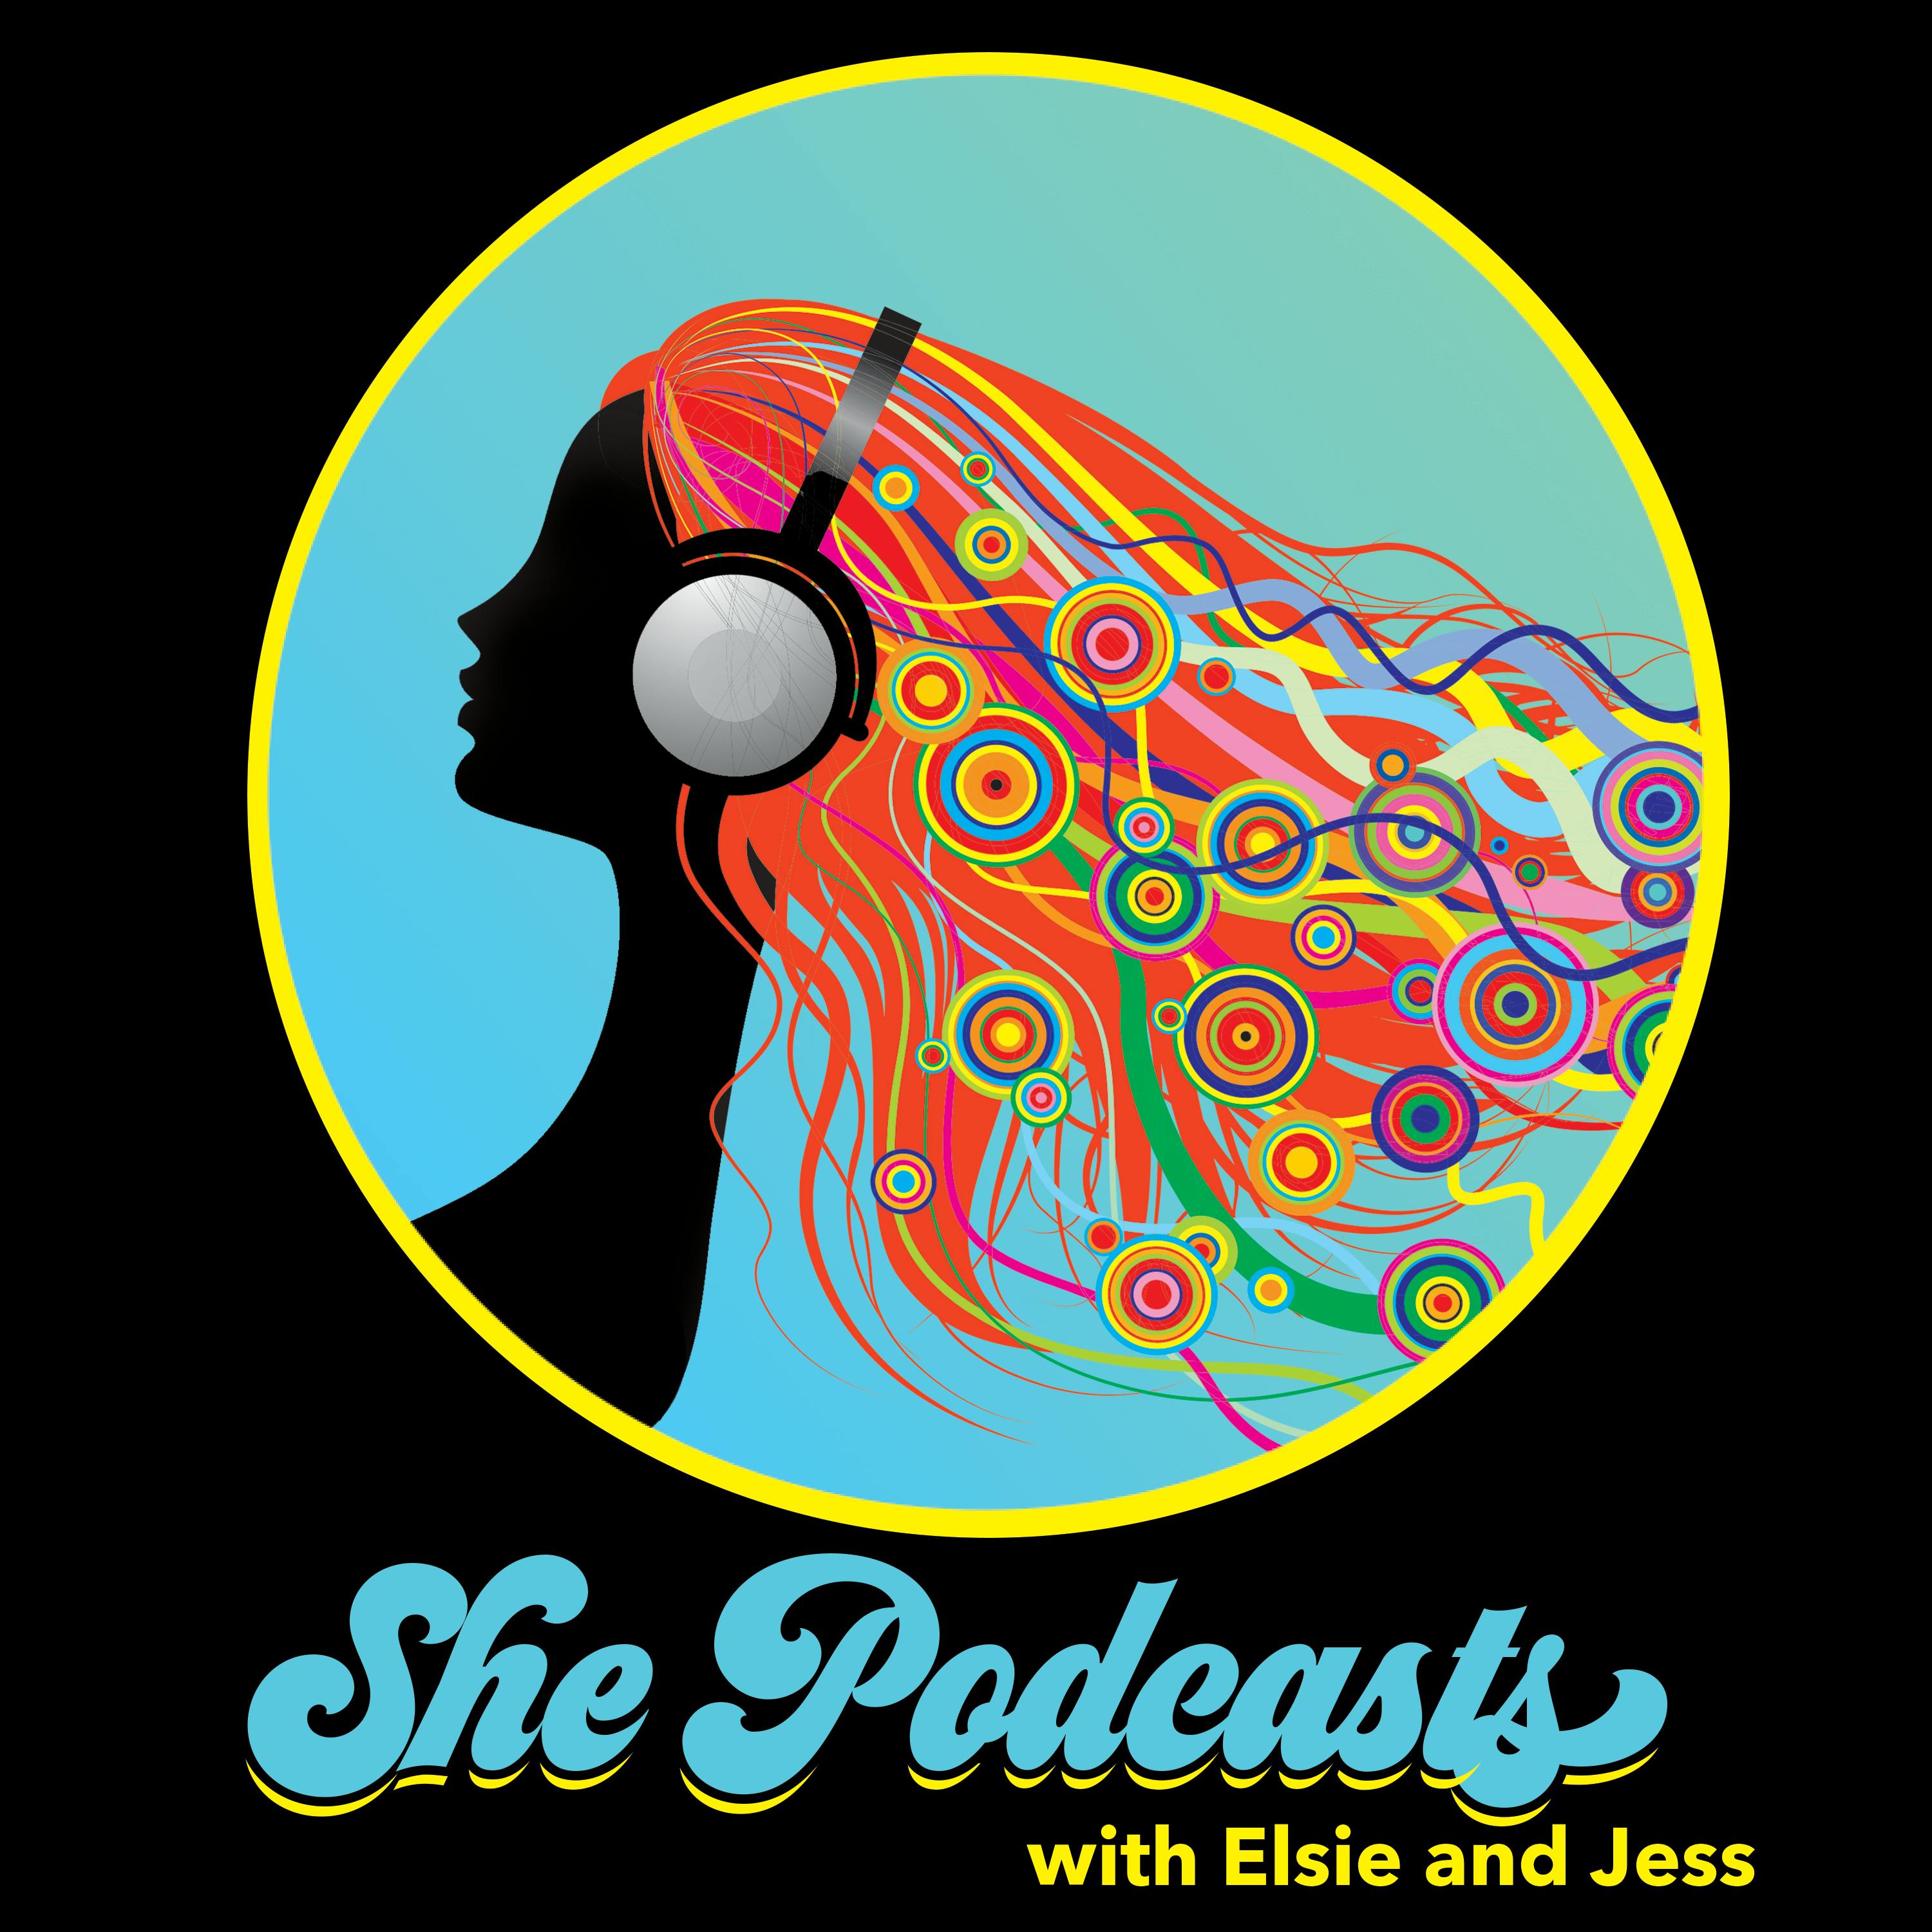 255 She Podcasts Live Is Going To Be Where?